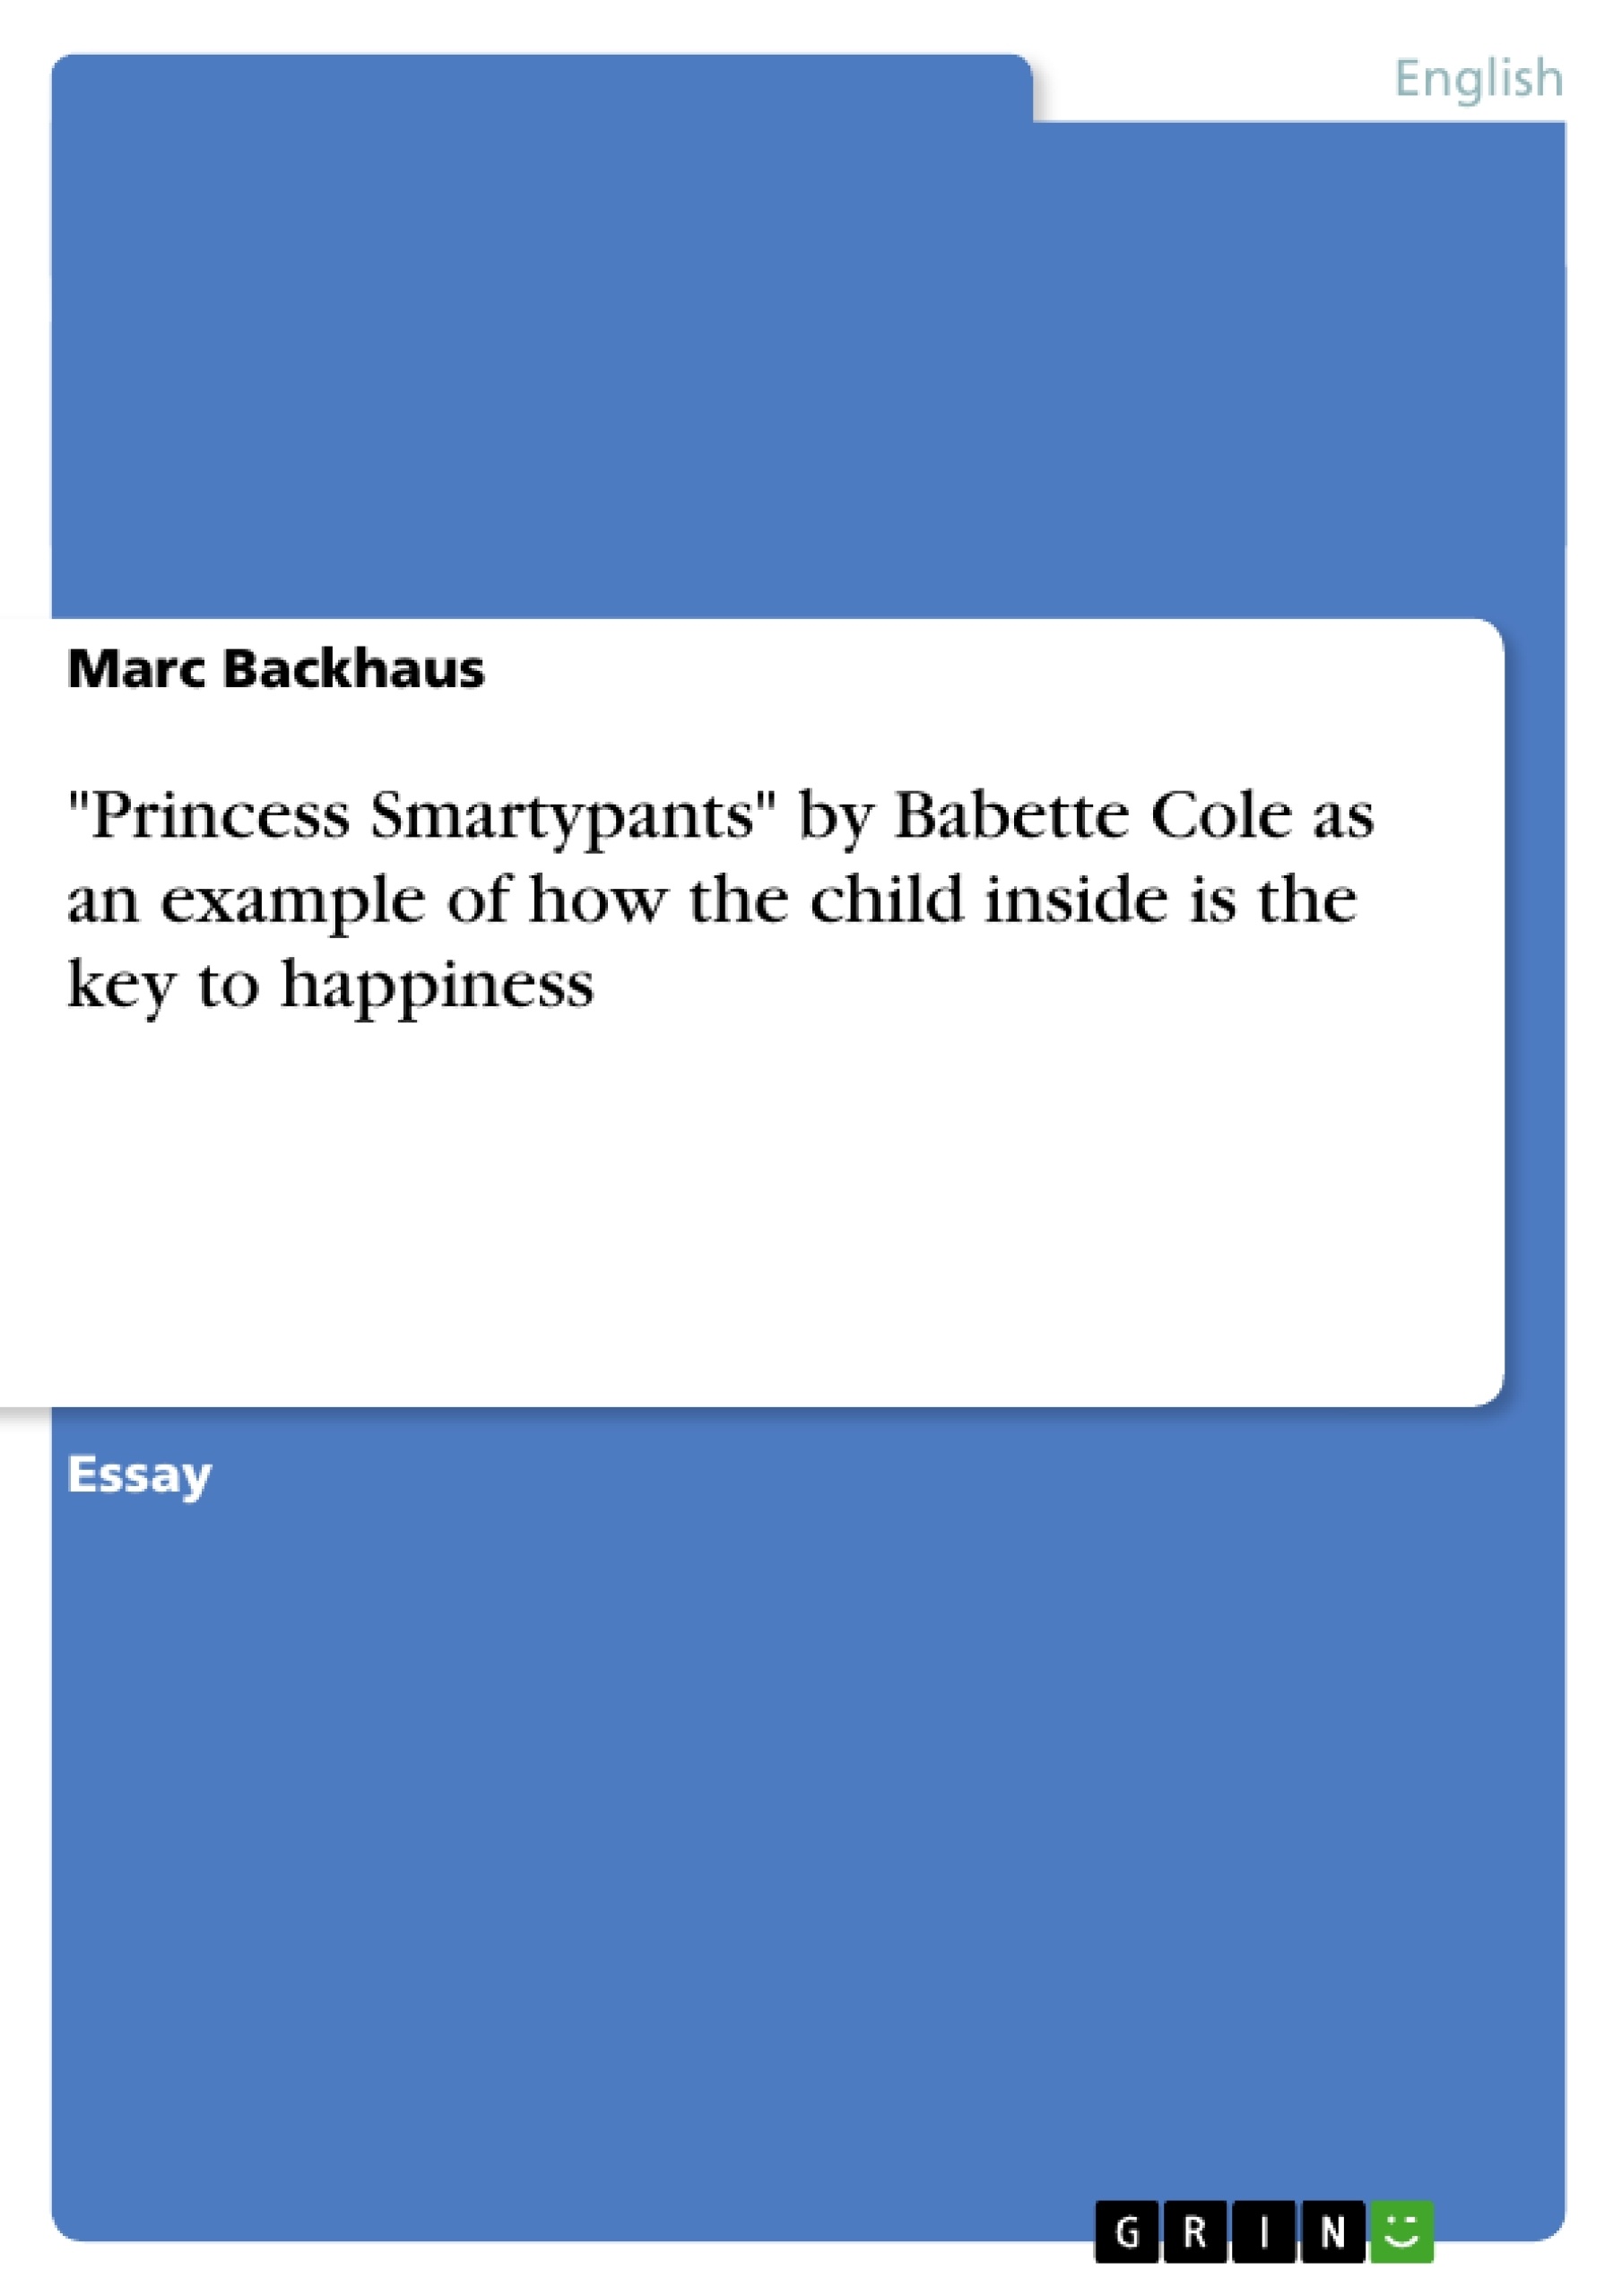 Titre: "Princess Smartypants" by Babette Cole as an example of how the child inside is the key to happiness